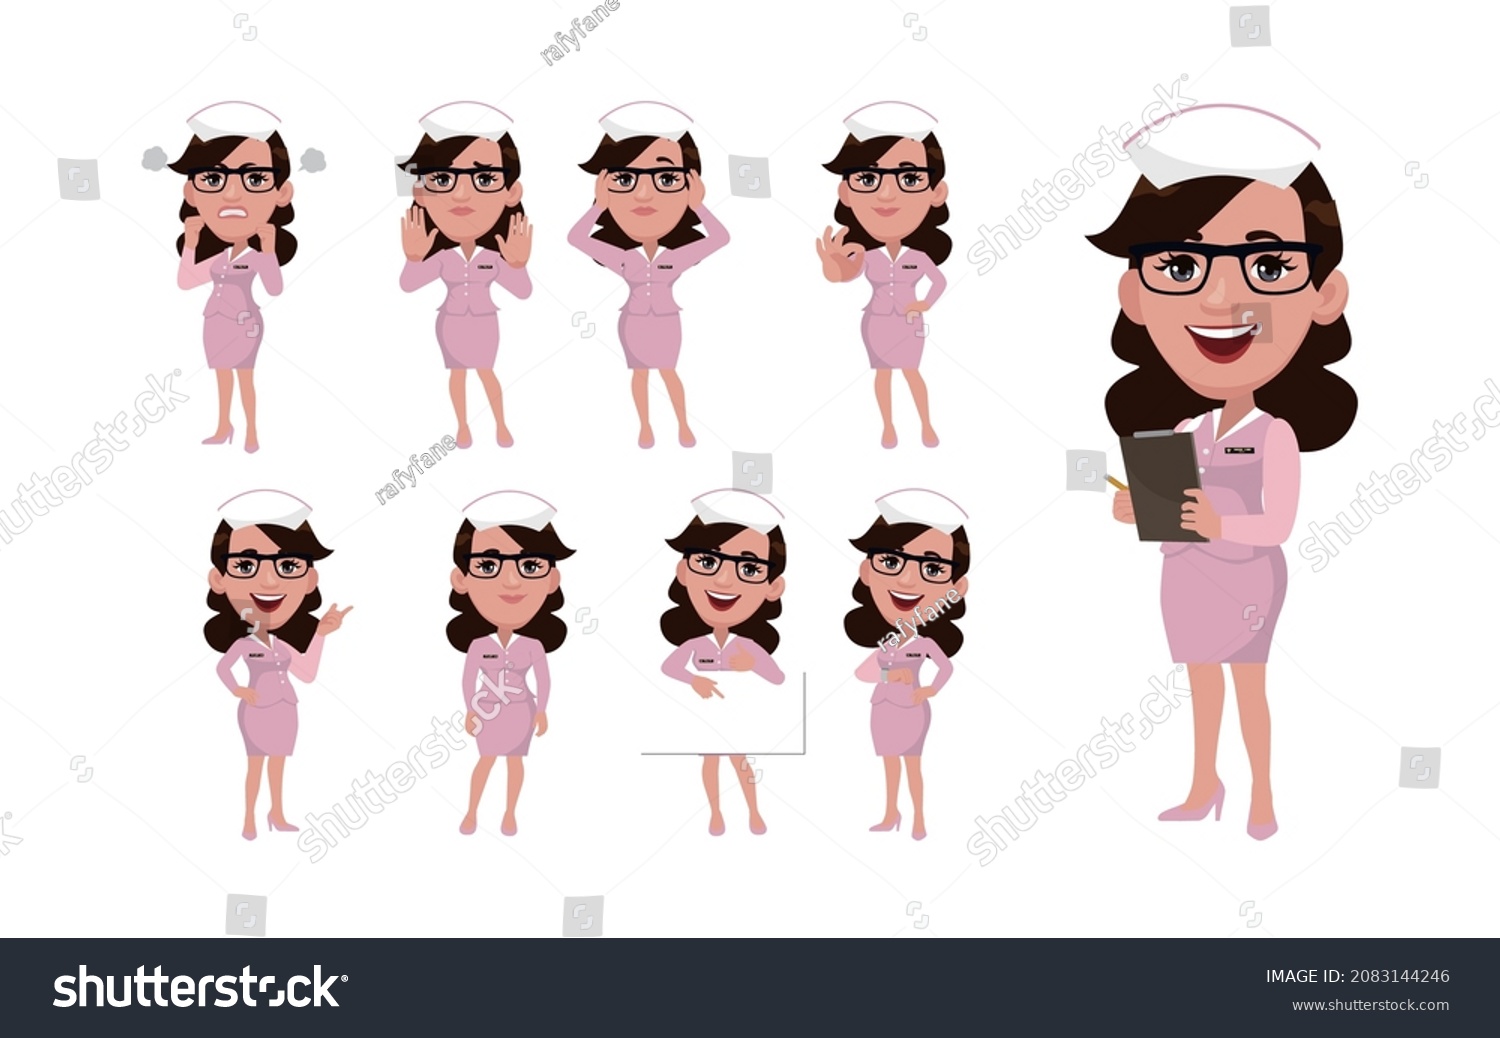 Nurse Different Poses Vector Stock Vector Royalty Free 2083144246 5250